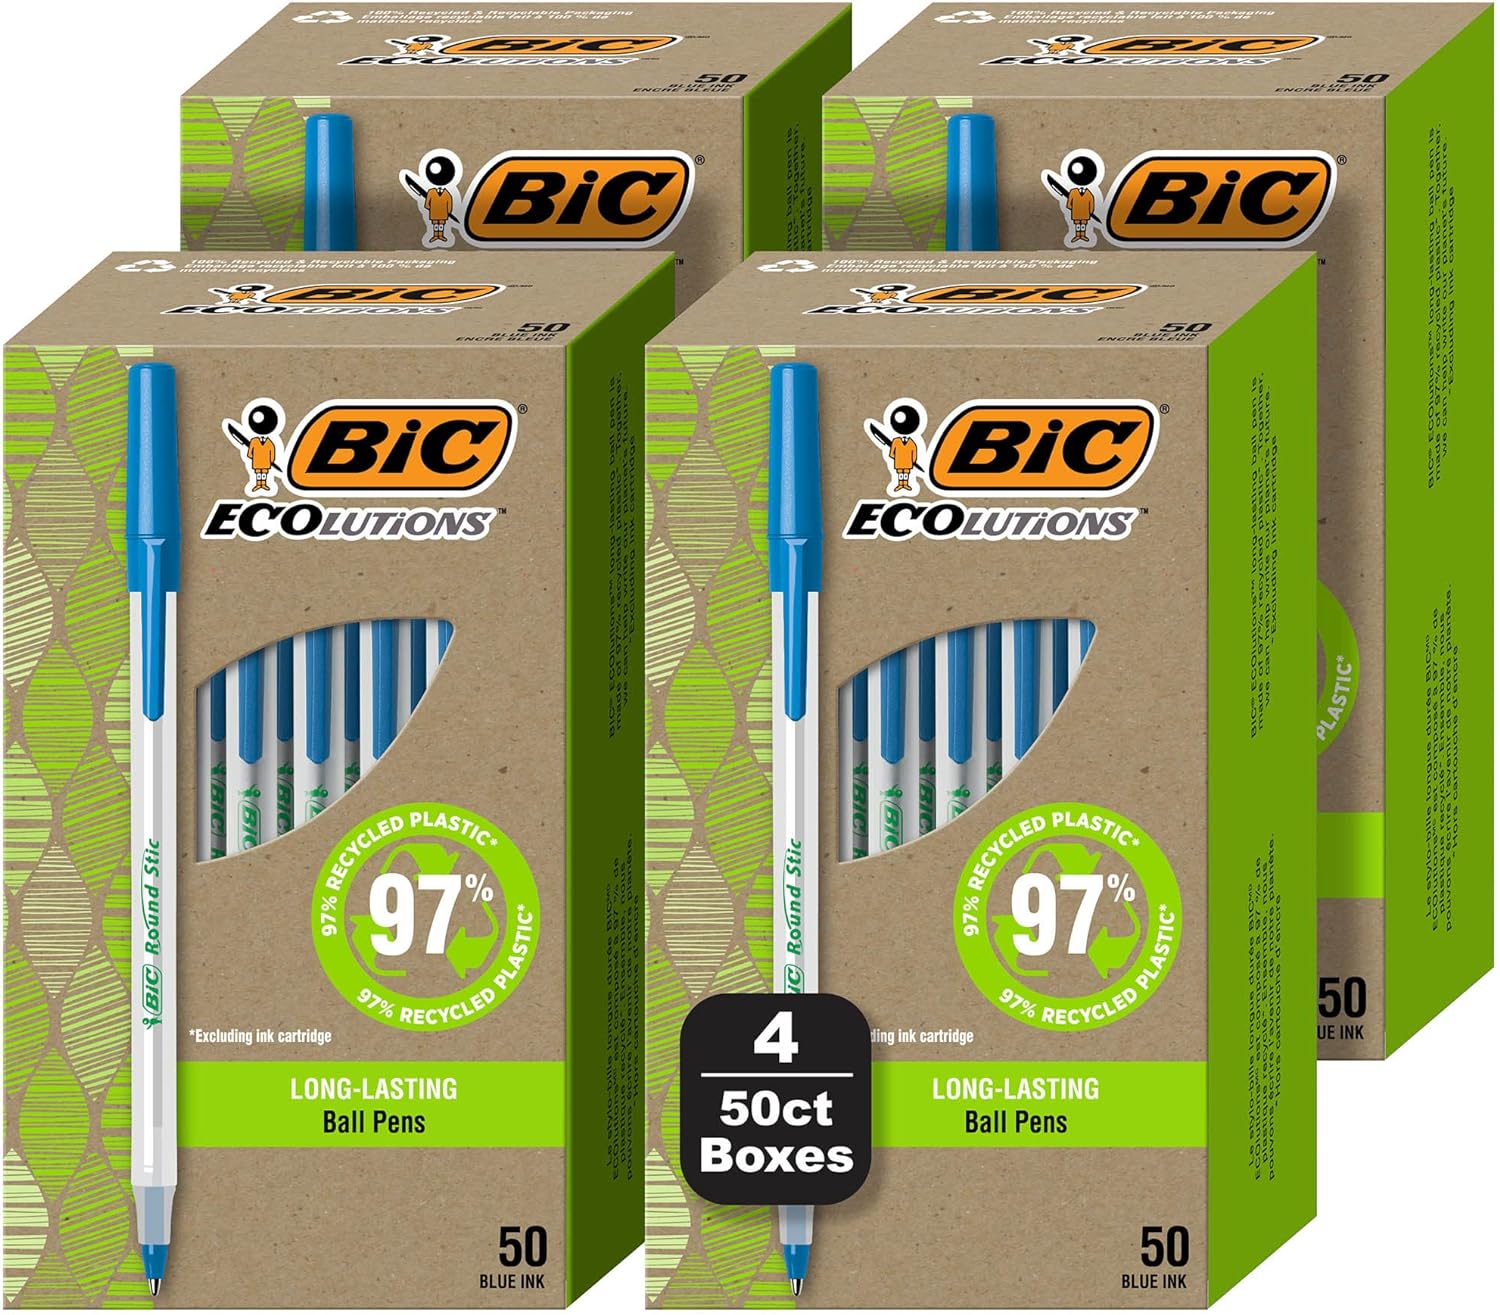 BIC Ecolutions Round Stic Ballpoint Pens, Medium Point (1.0mm), 200-Count Pack, Blue Ink Pens Made from 97% Recycled Plastic